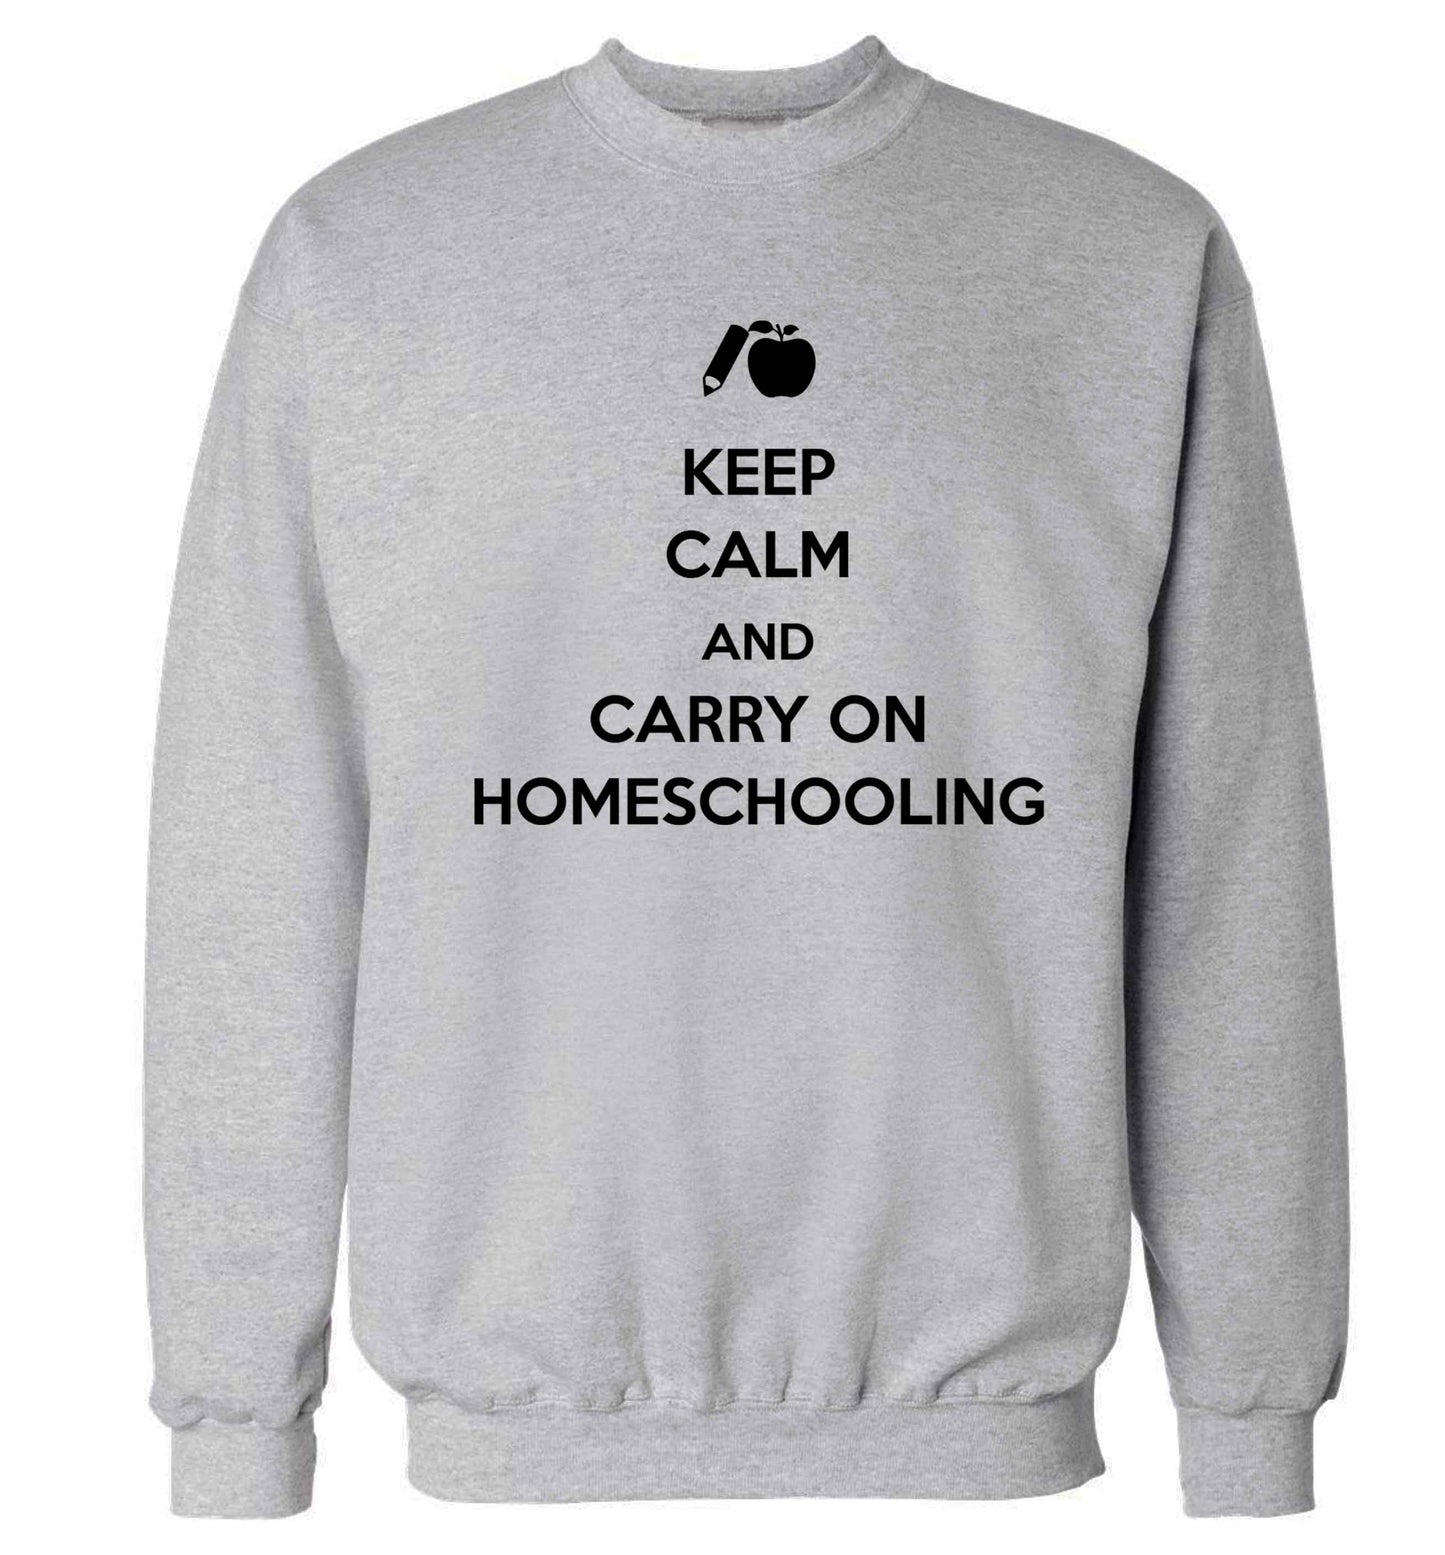 Keep calm and carry on homeschooling Adult's unisex grey Sweater 2XL